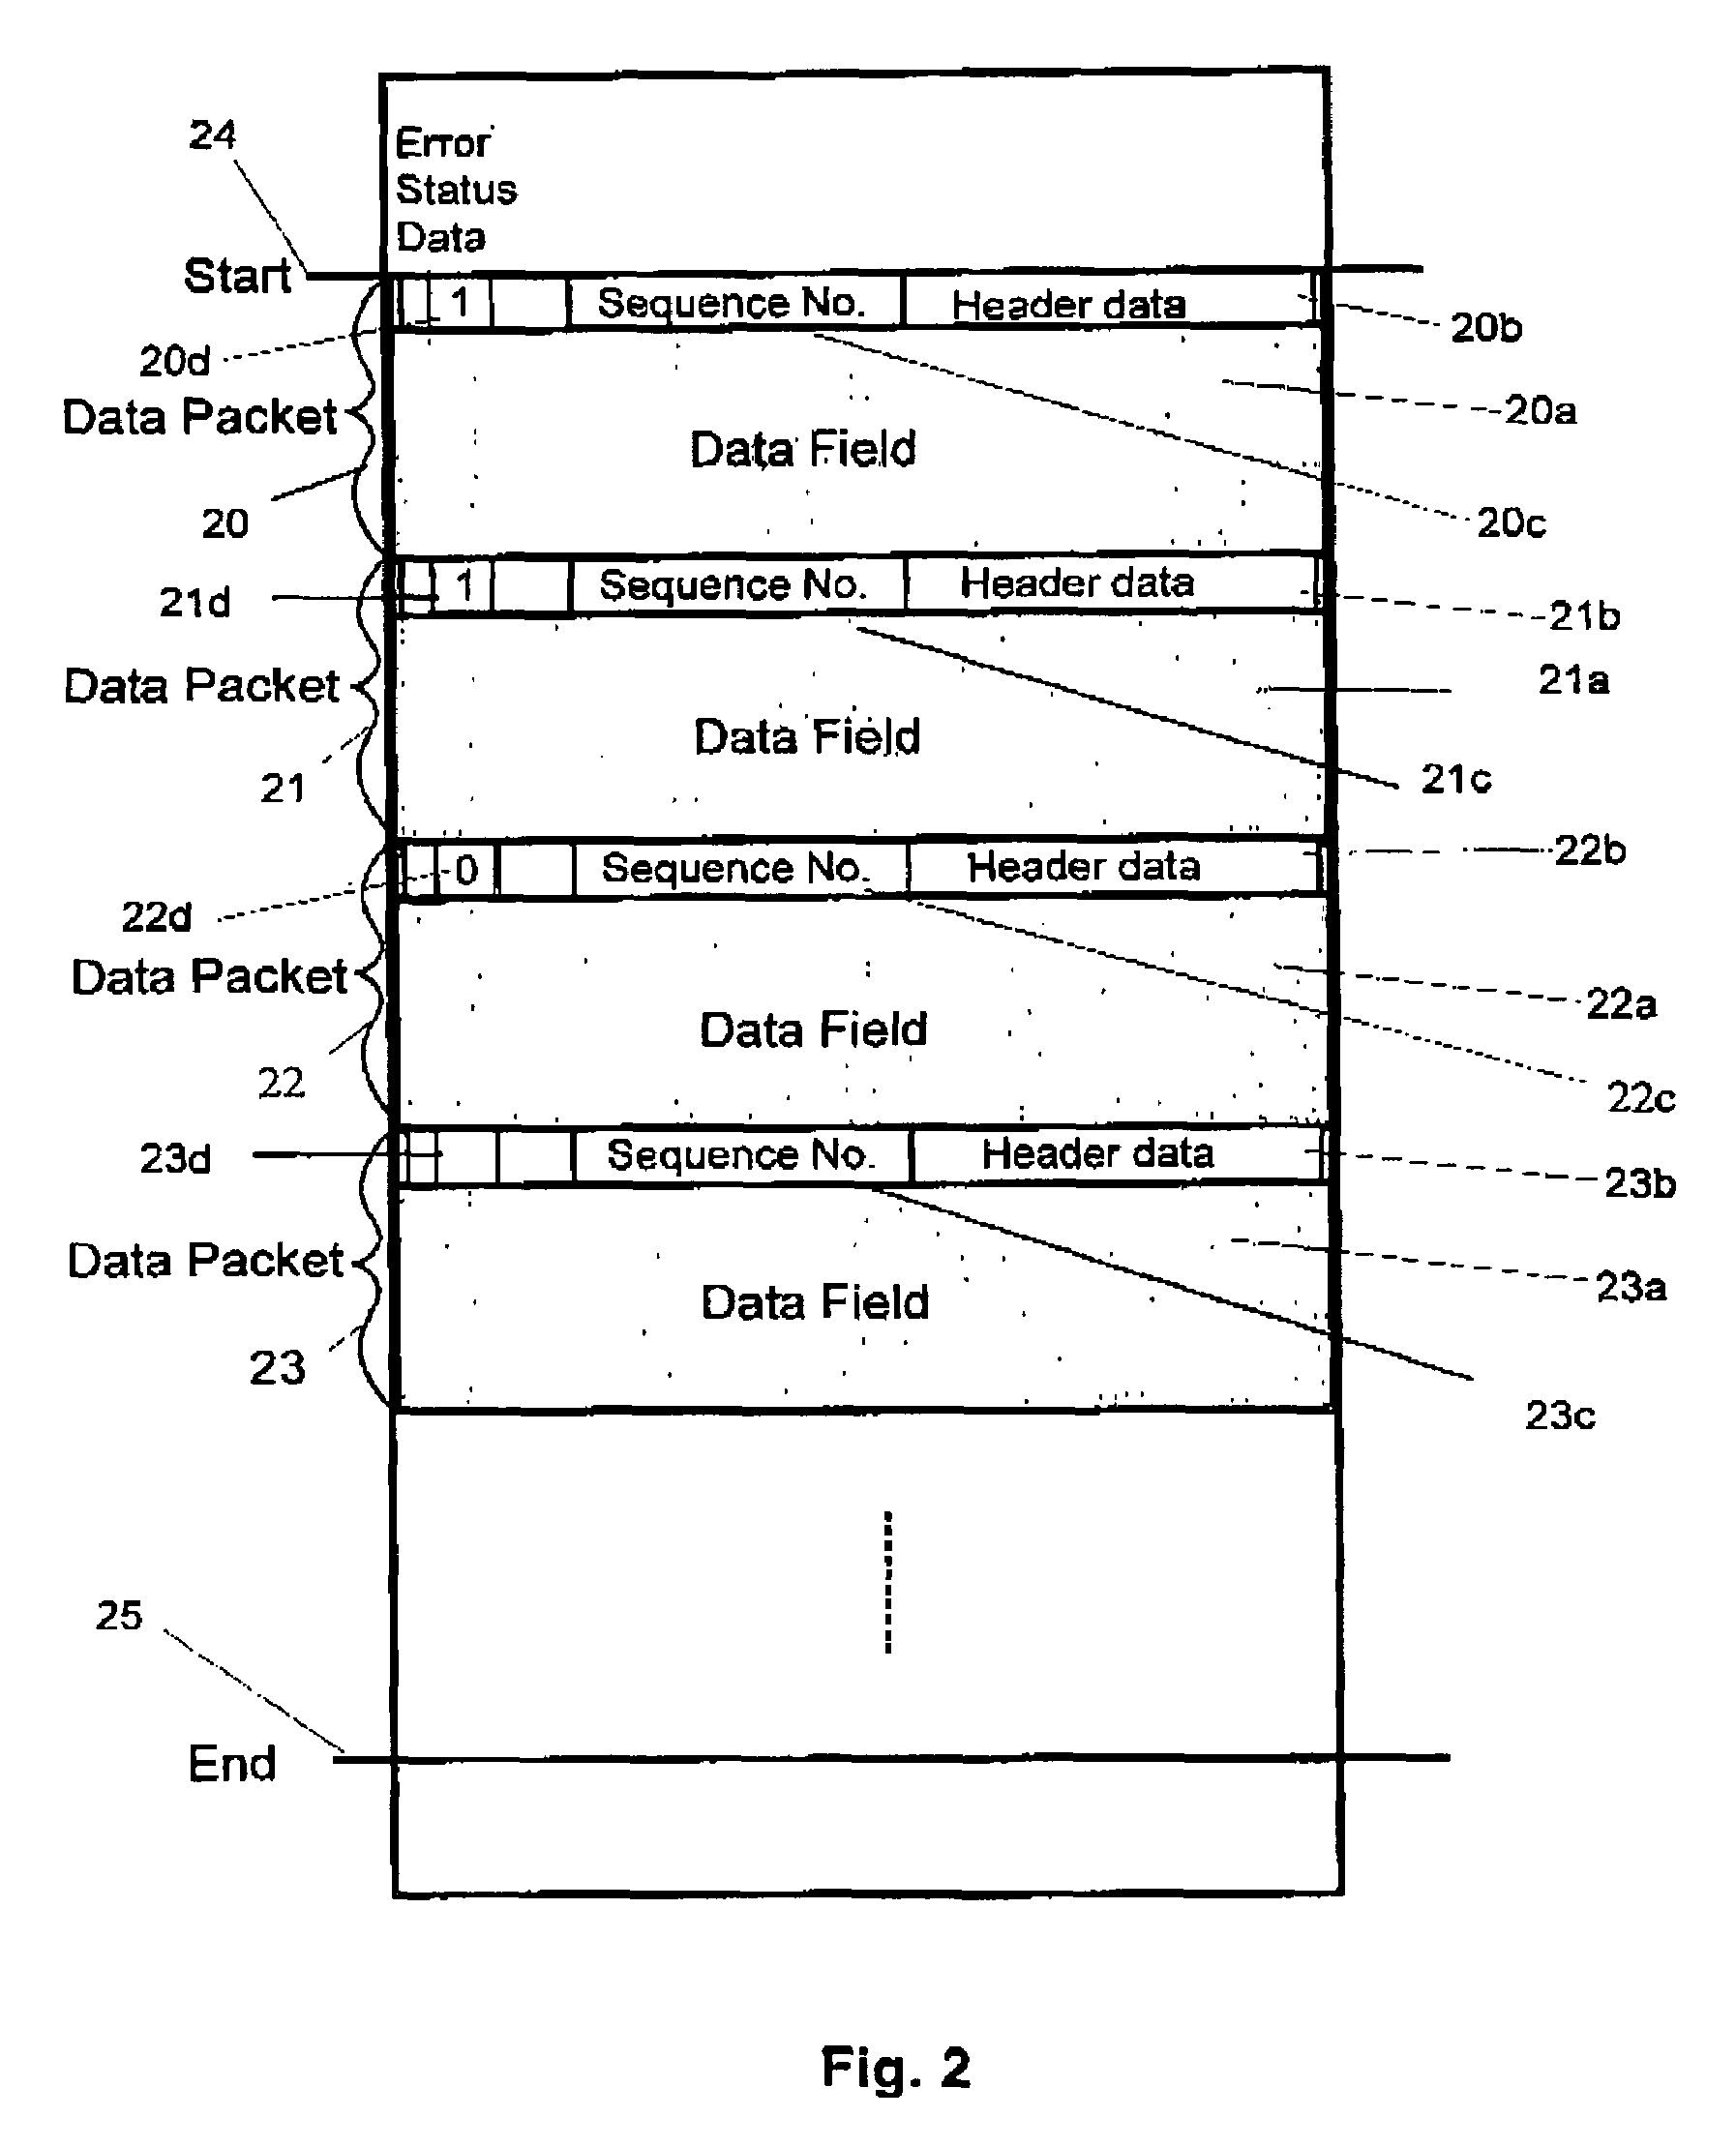 Method for synchronizing memory areas in a transmitter apparatus and a receiver apparatus, and receiver apparatus